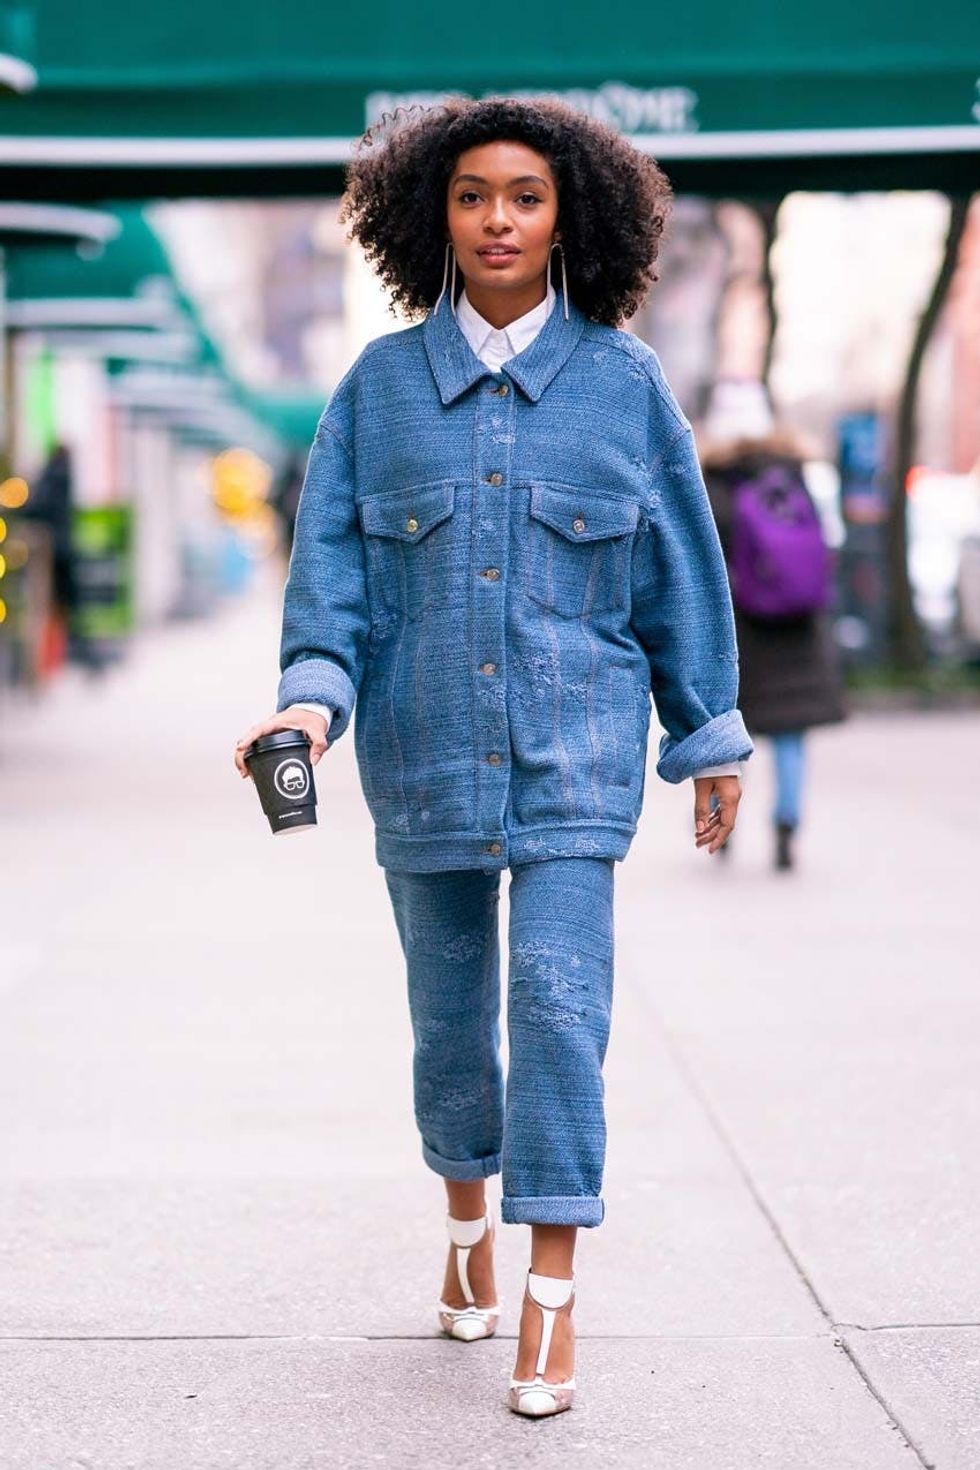 9 Creative Ways to Wear Jeans This Spring, According to Celebs - Brit + Co